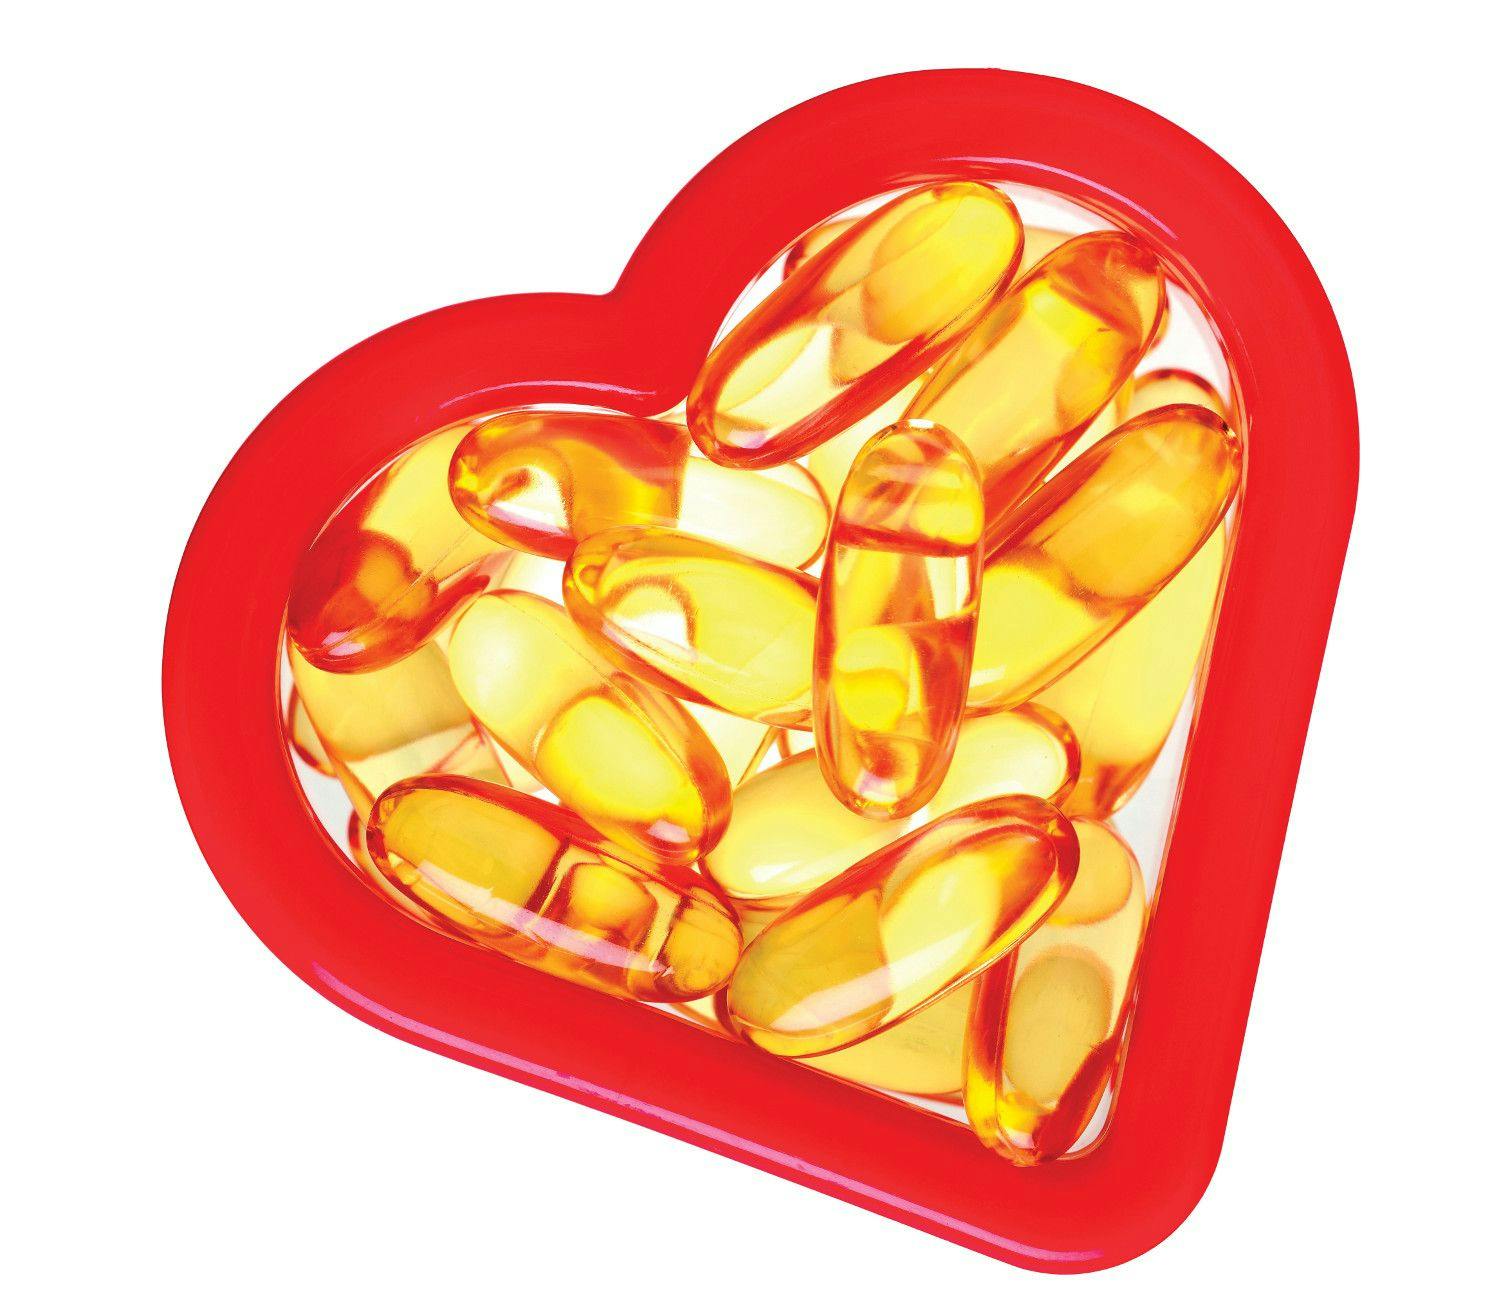 Are Omega-3 Supplements Heart-Healthy?